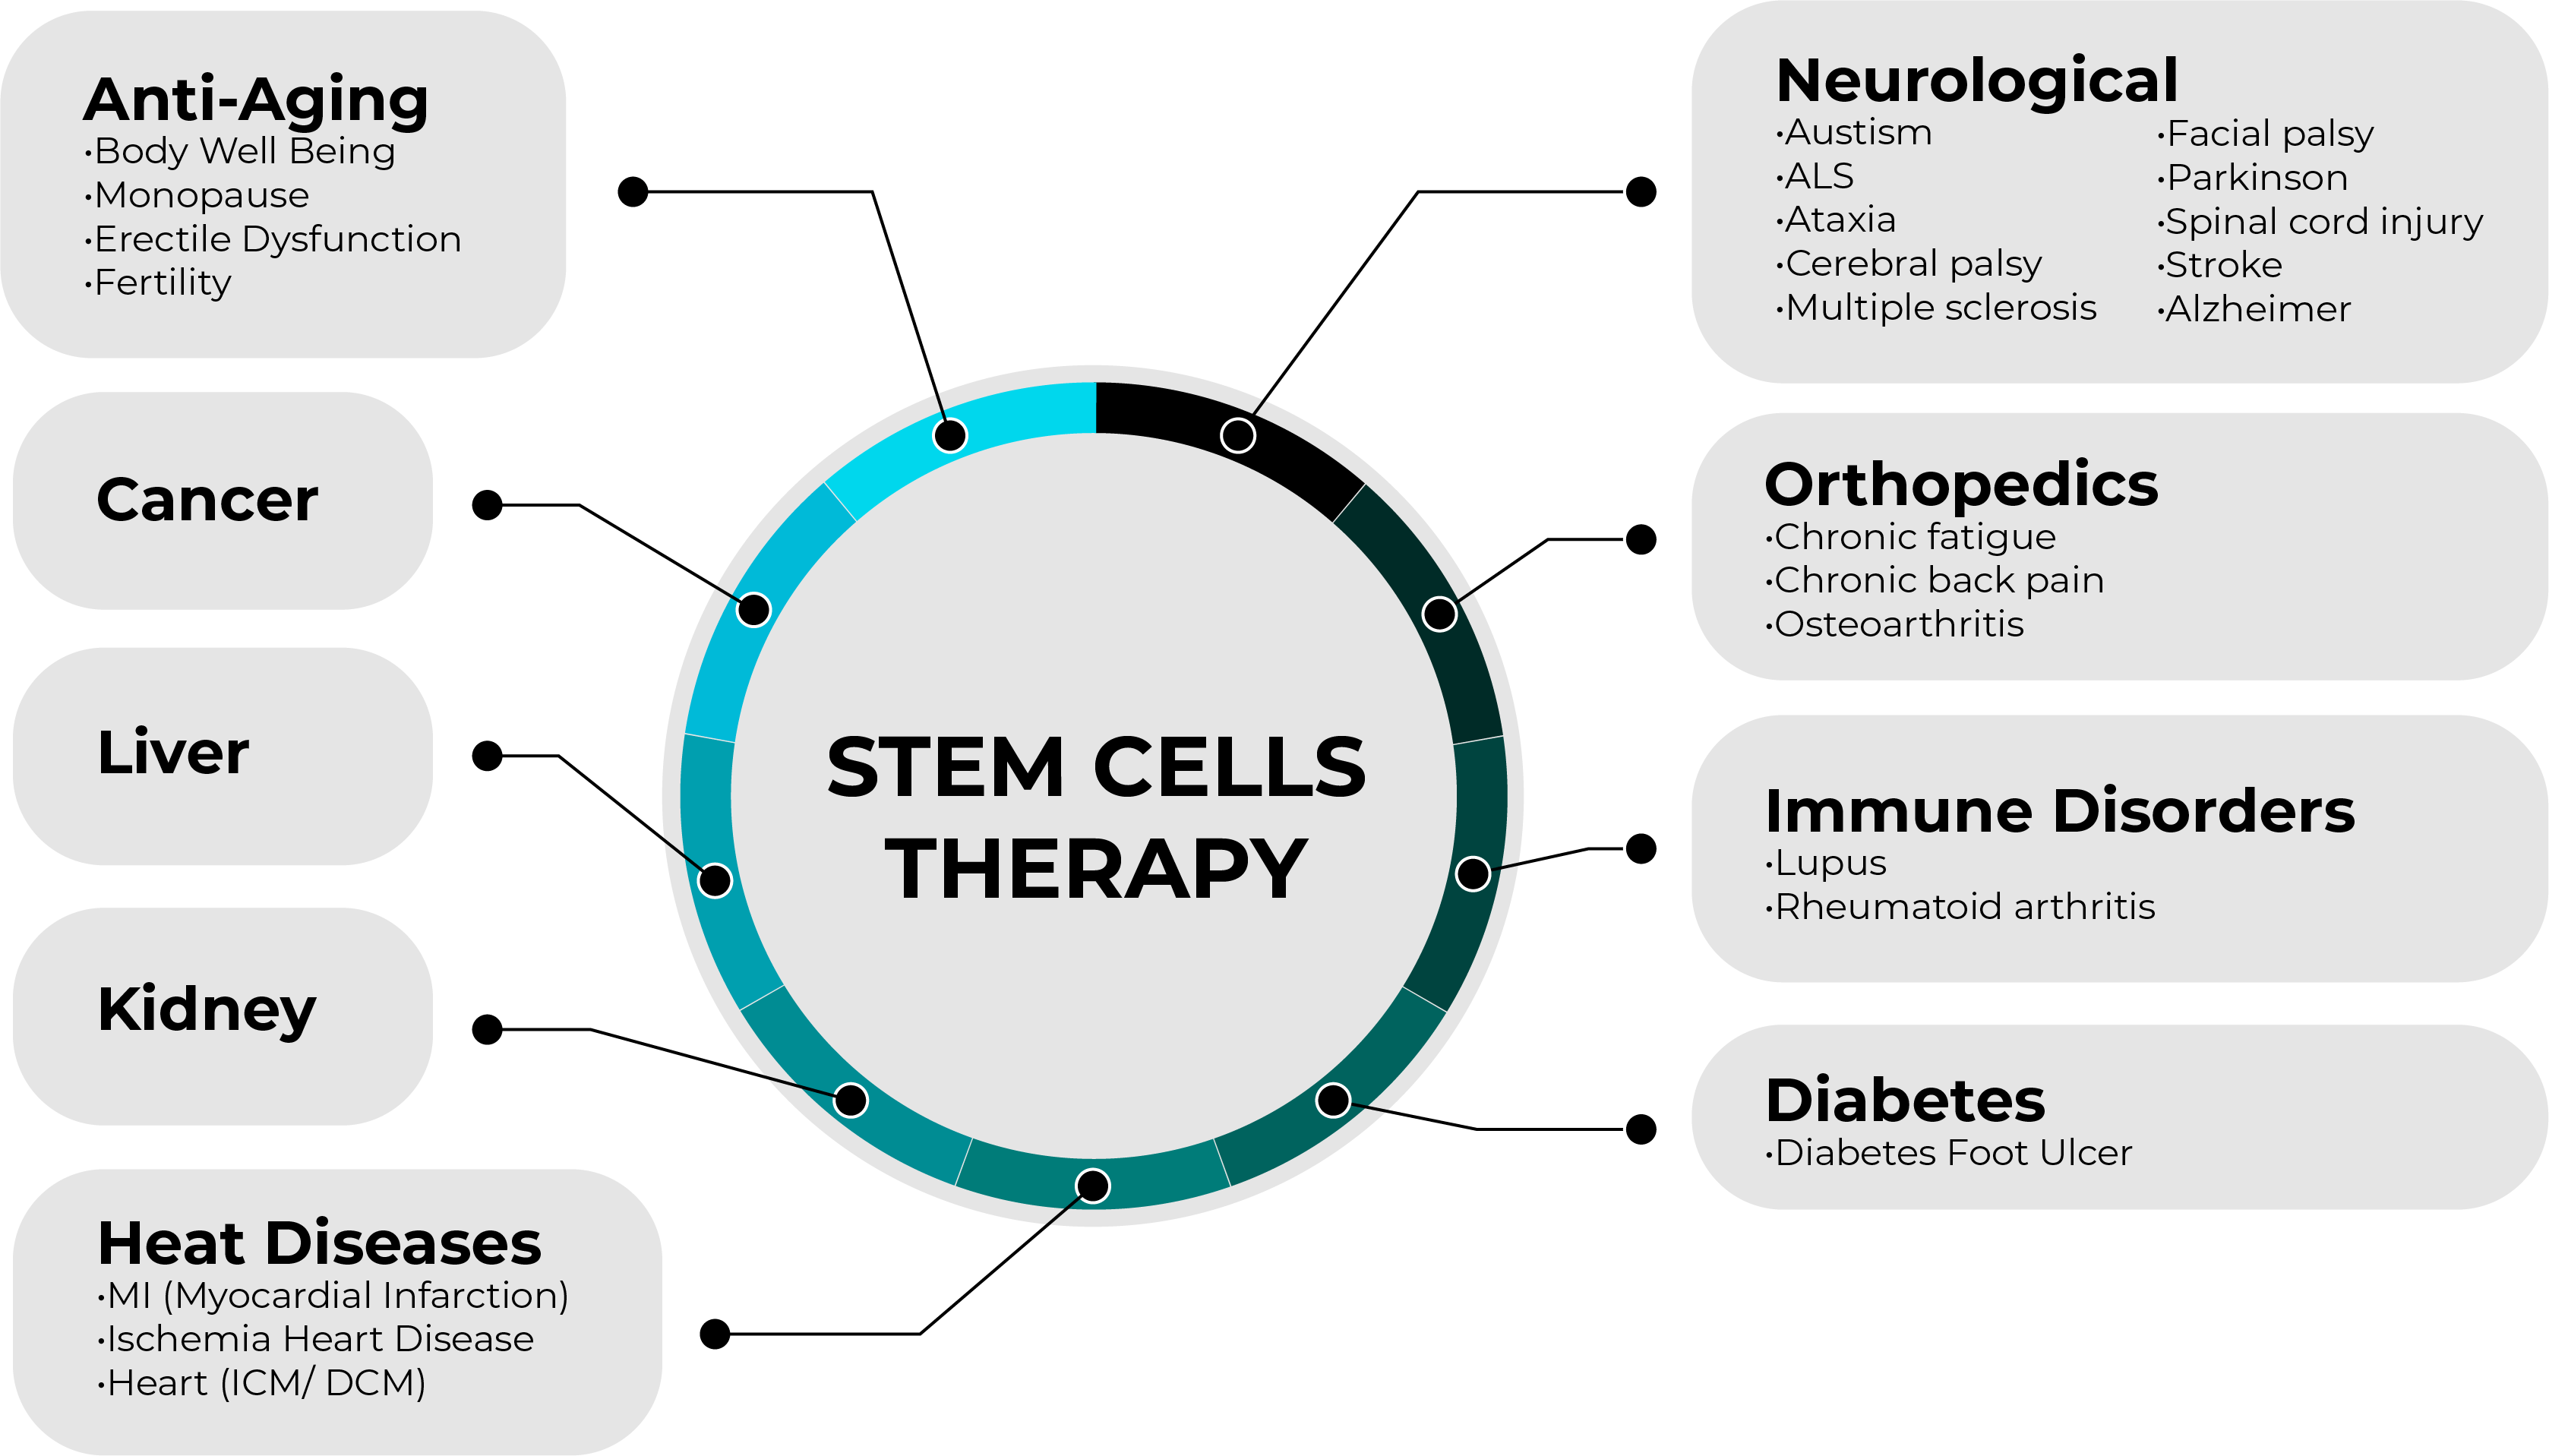 stem cell research & therapy scimago